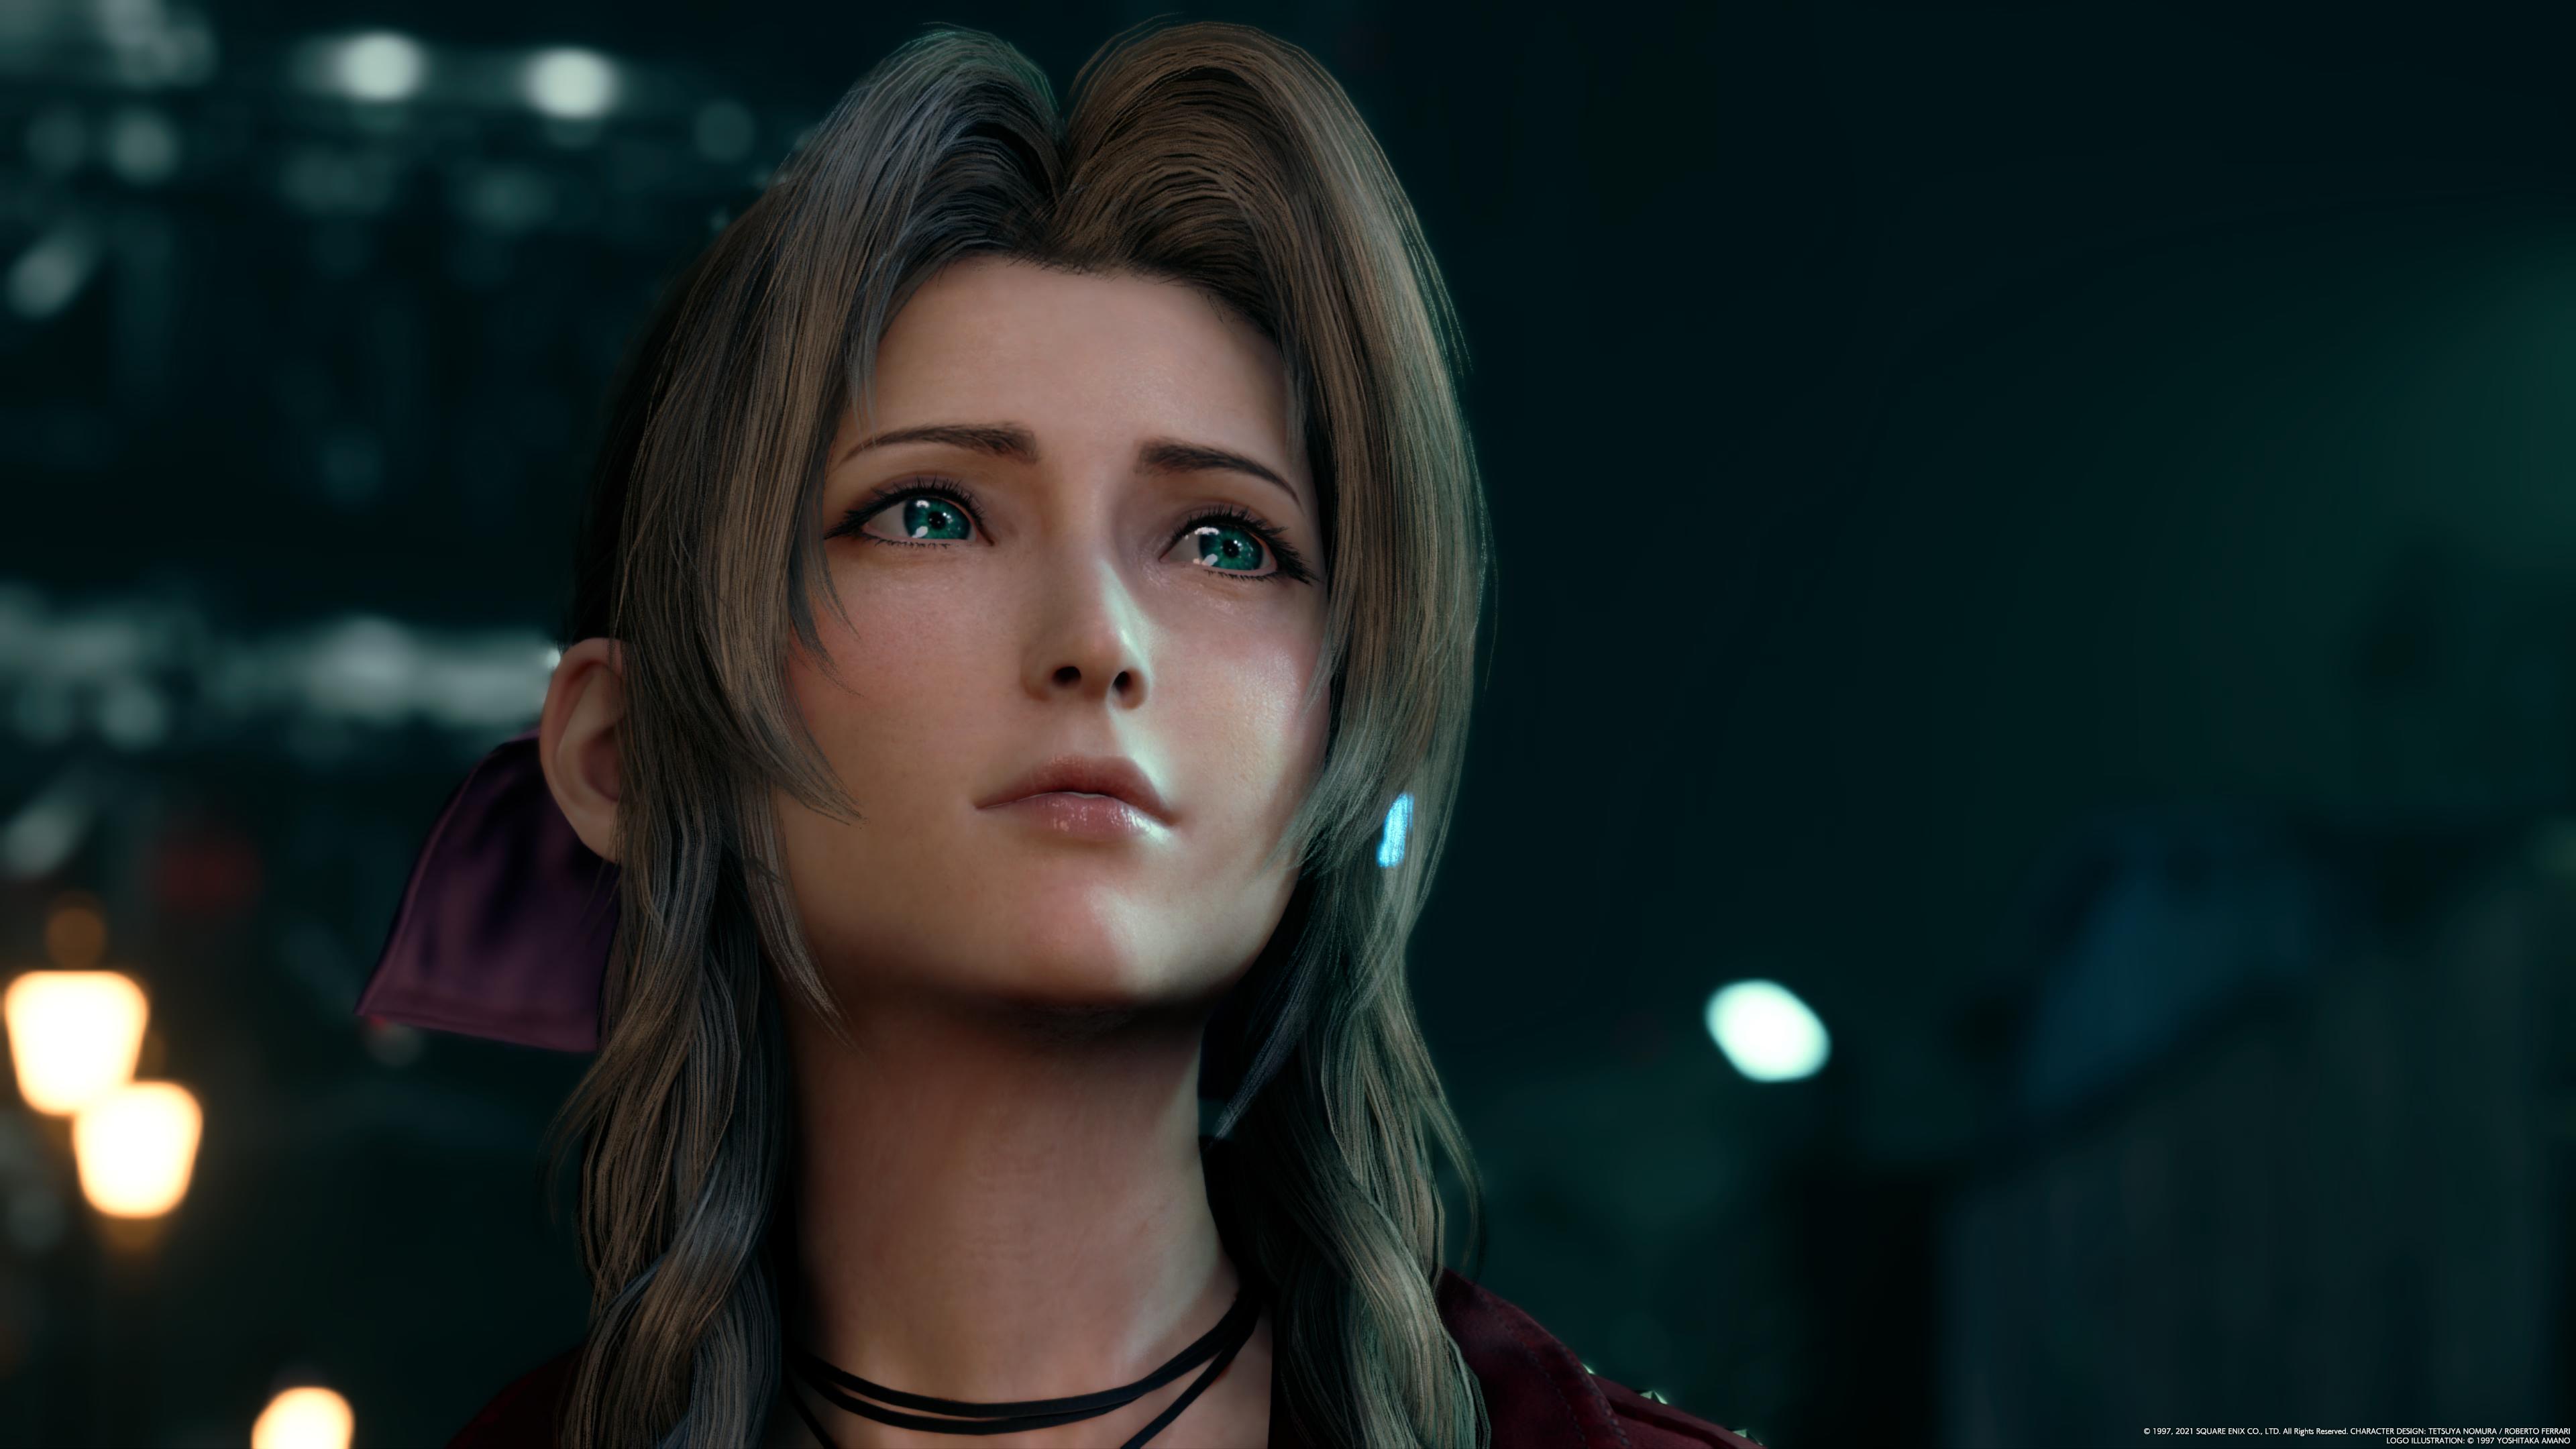 General 3840x2160 Aerith Gainsborough Final Fantasy VII Square Enix video games Final Fantasy VII: Remake video game characters video game girls crying